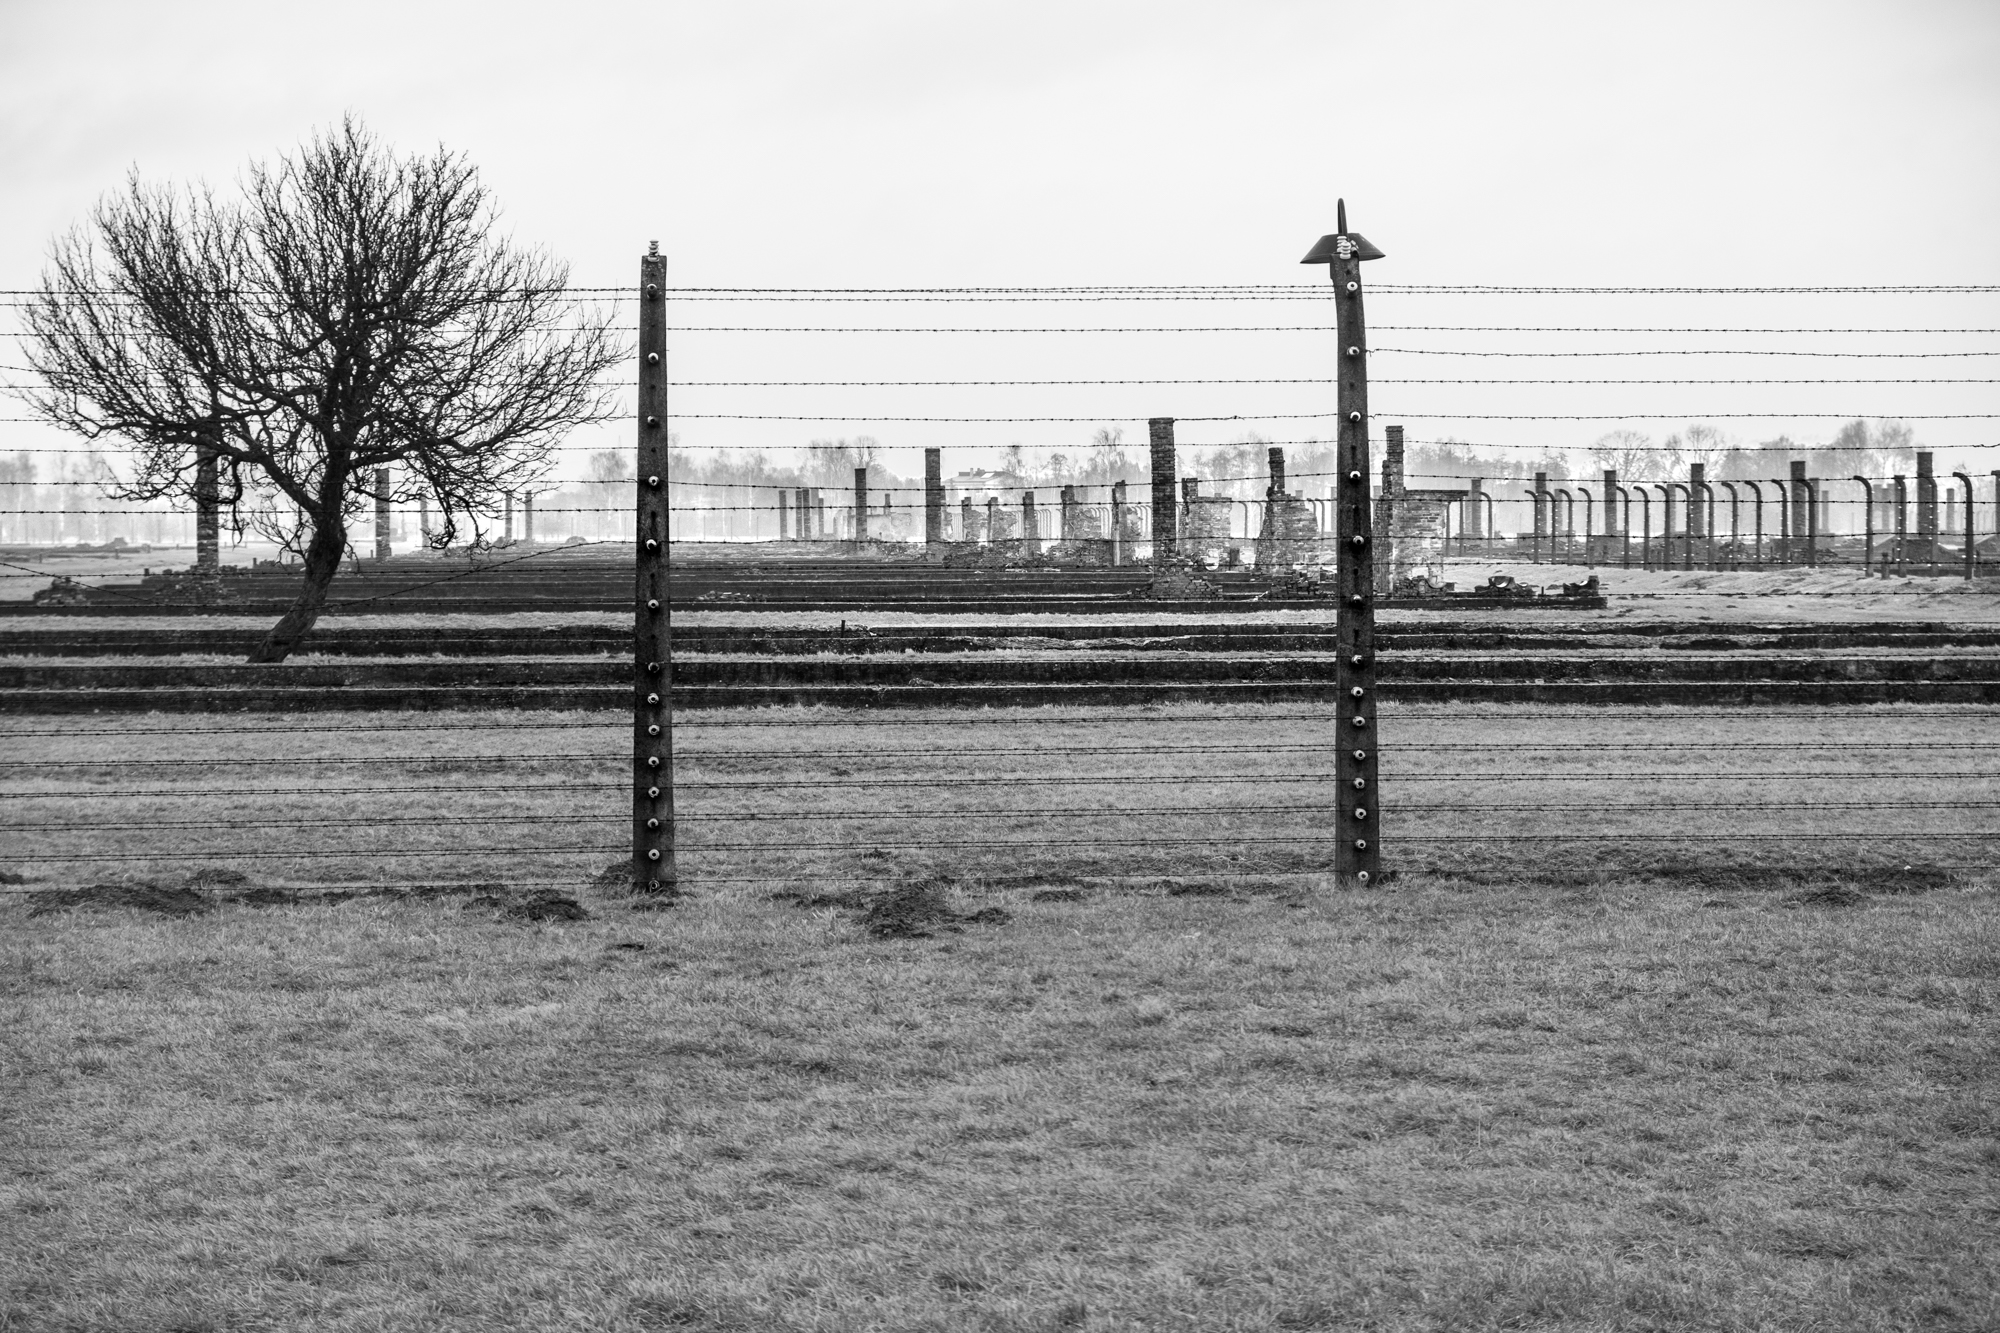 Half of the concentration camp was razed to the ground as the Nazis fled